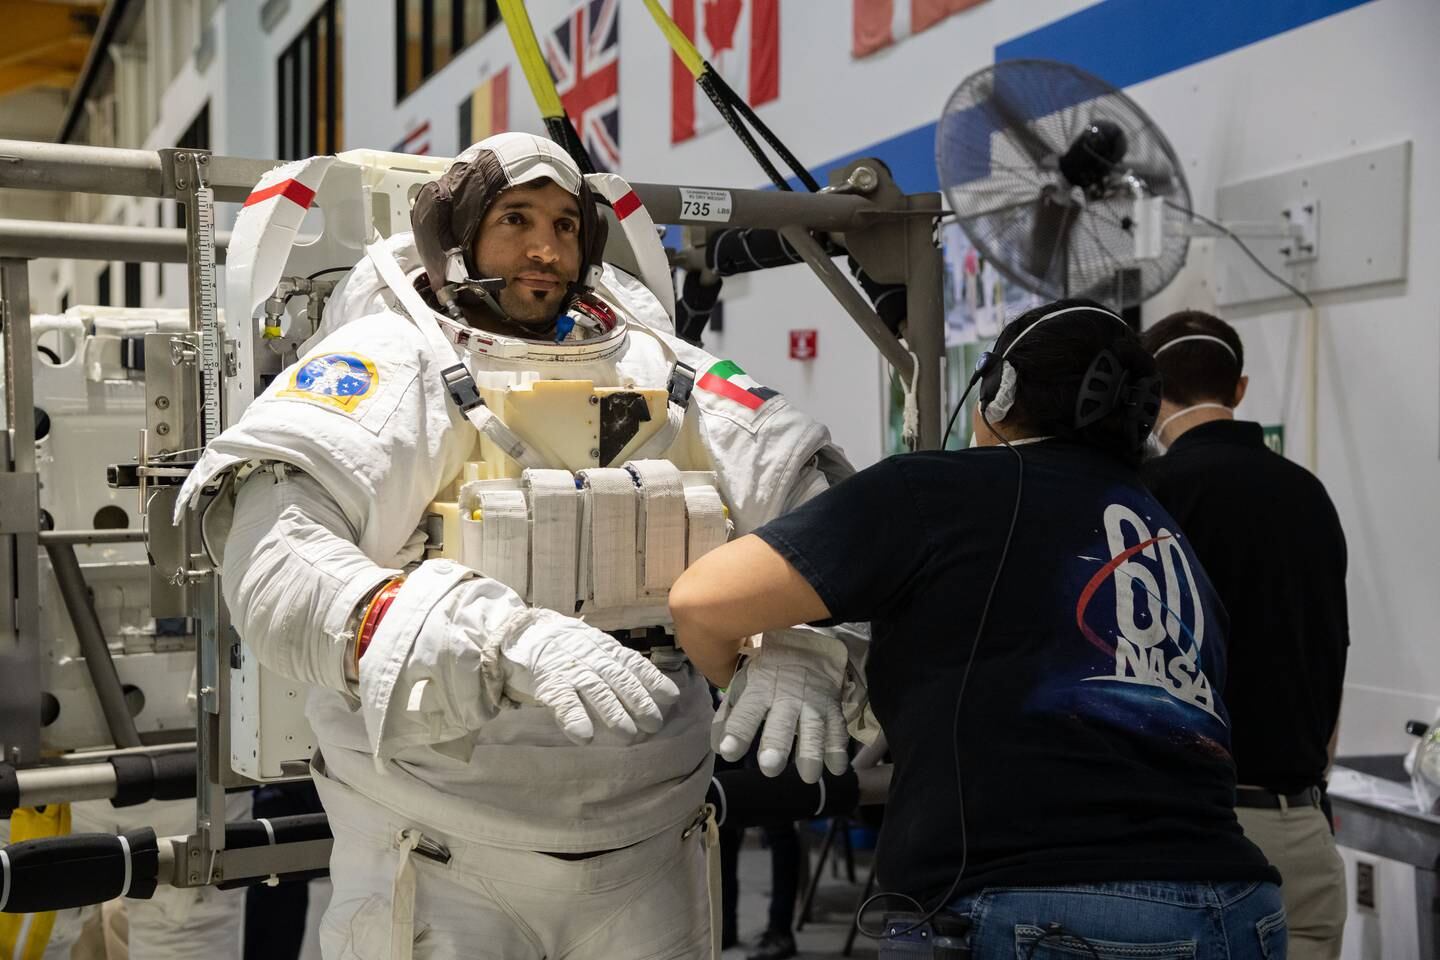 PHOTO DATE:  01-19-21LOCATION:  NBL - Pool TopsideSUBJECT:  Photographic coverage of UAE astronauts Hazzaa AlMansoori and Sultan AlNeyadi in Topside Suit-up for EVQ NBL 1 training in NBL/pool deckPHOTOGRAPHER: BILL STAFFORD